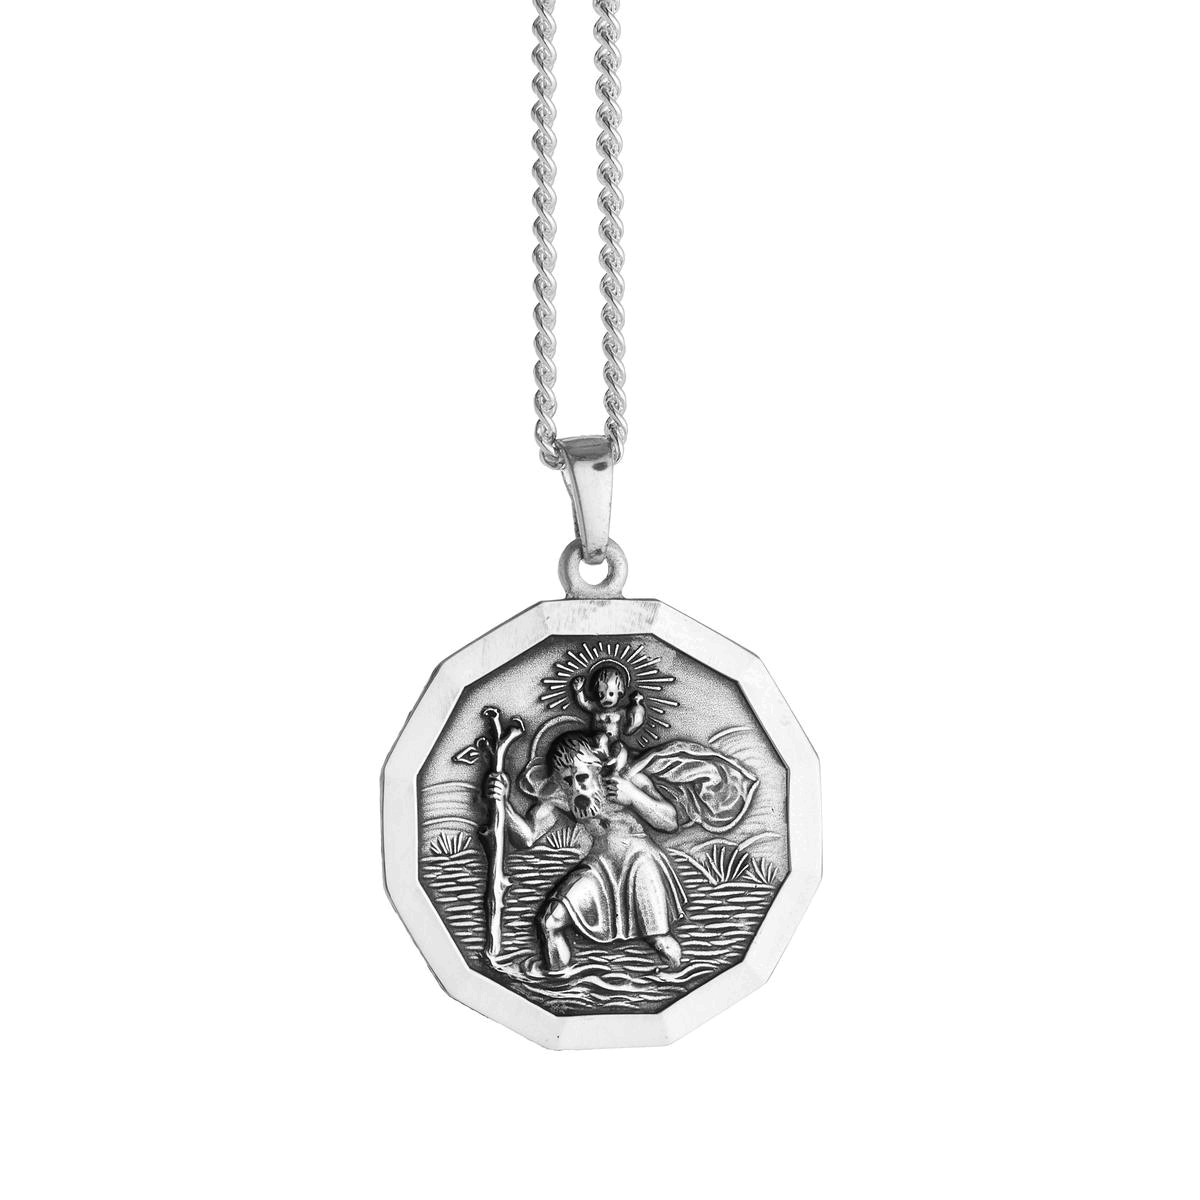 large silver 12 sided saint christopher necklace off the map travel jewelry for men